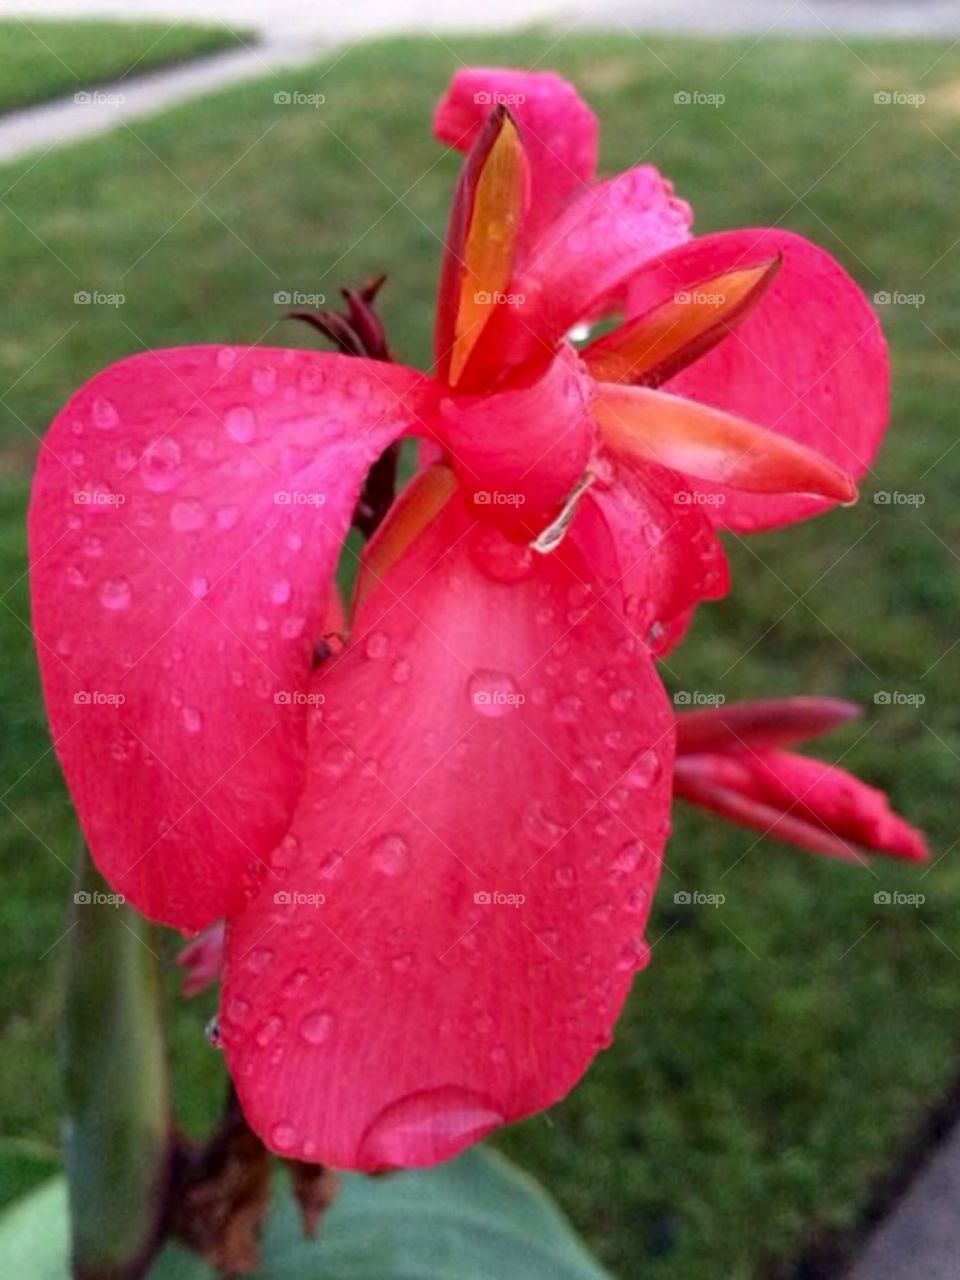 Flower after the rain 